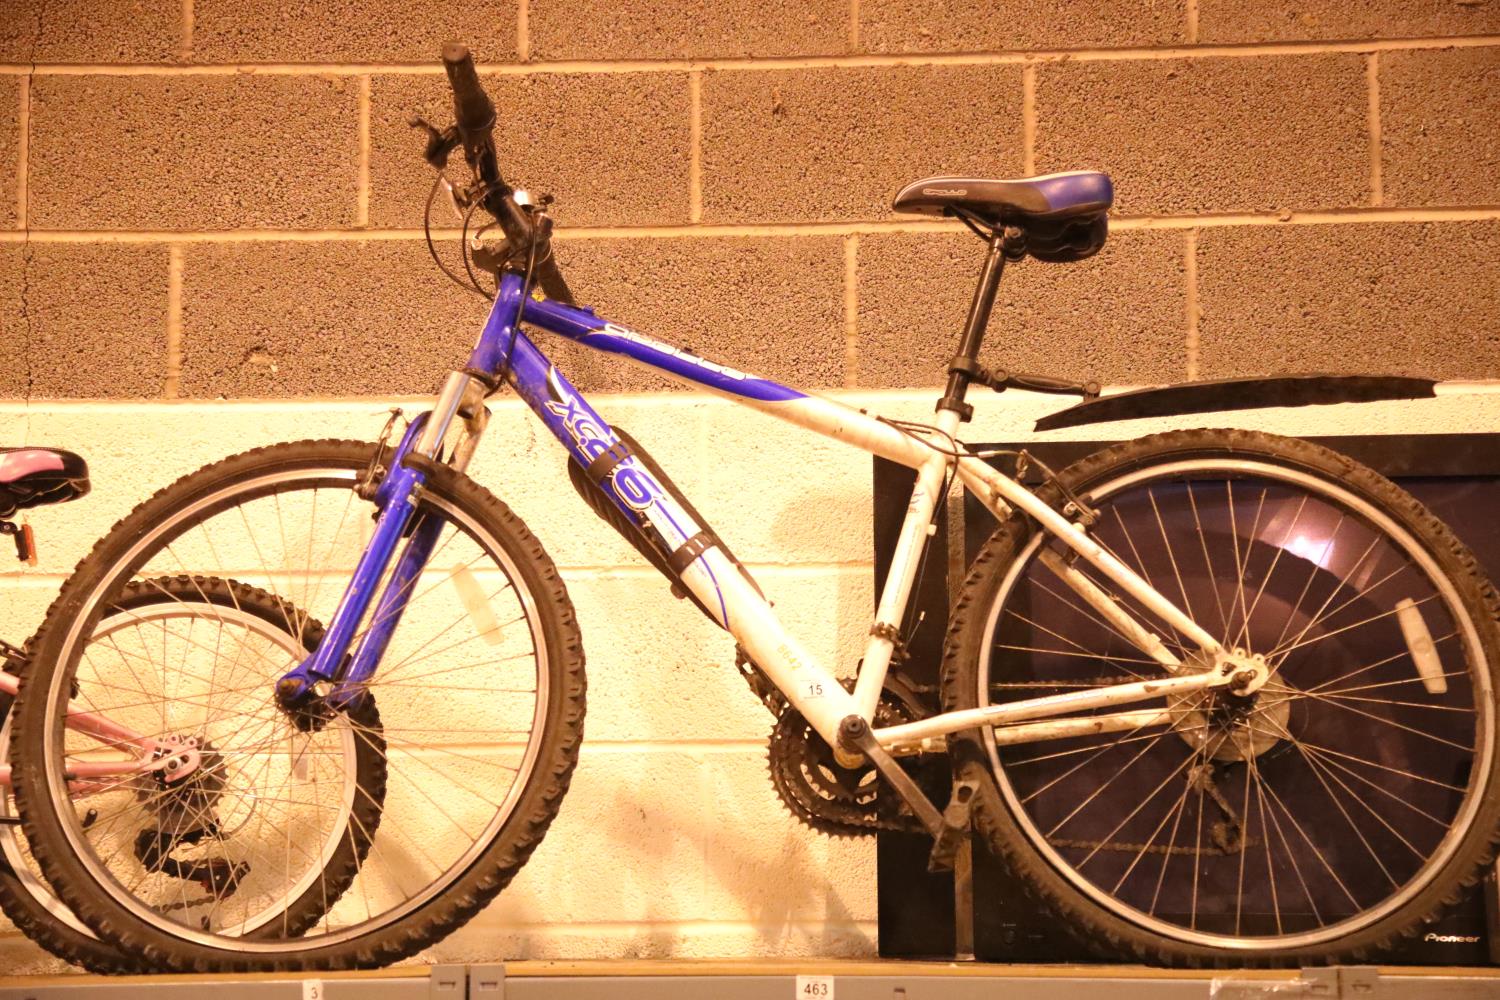 Gents Apollo XC26 18 speed trail bike with 17" frame. Not available for in-house P&P